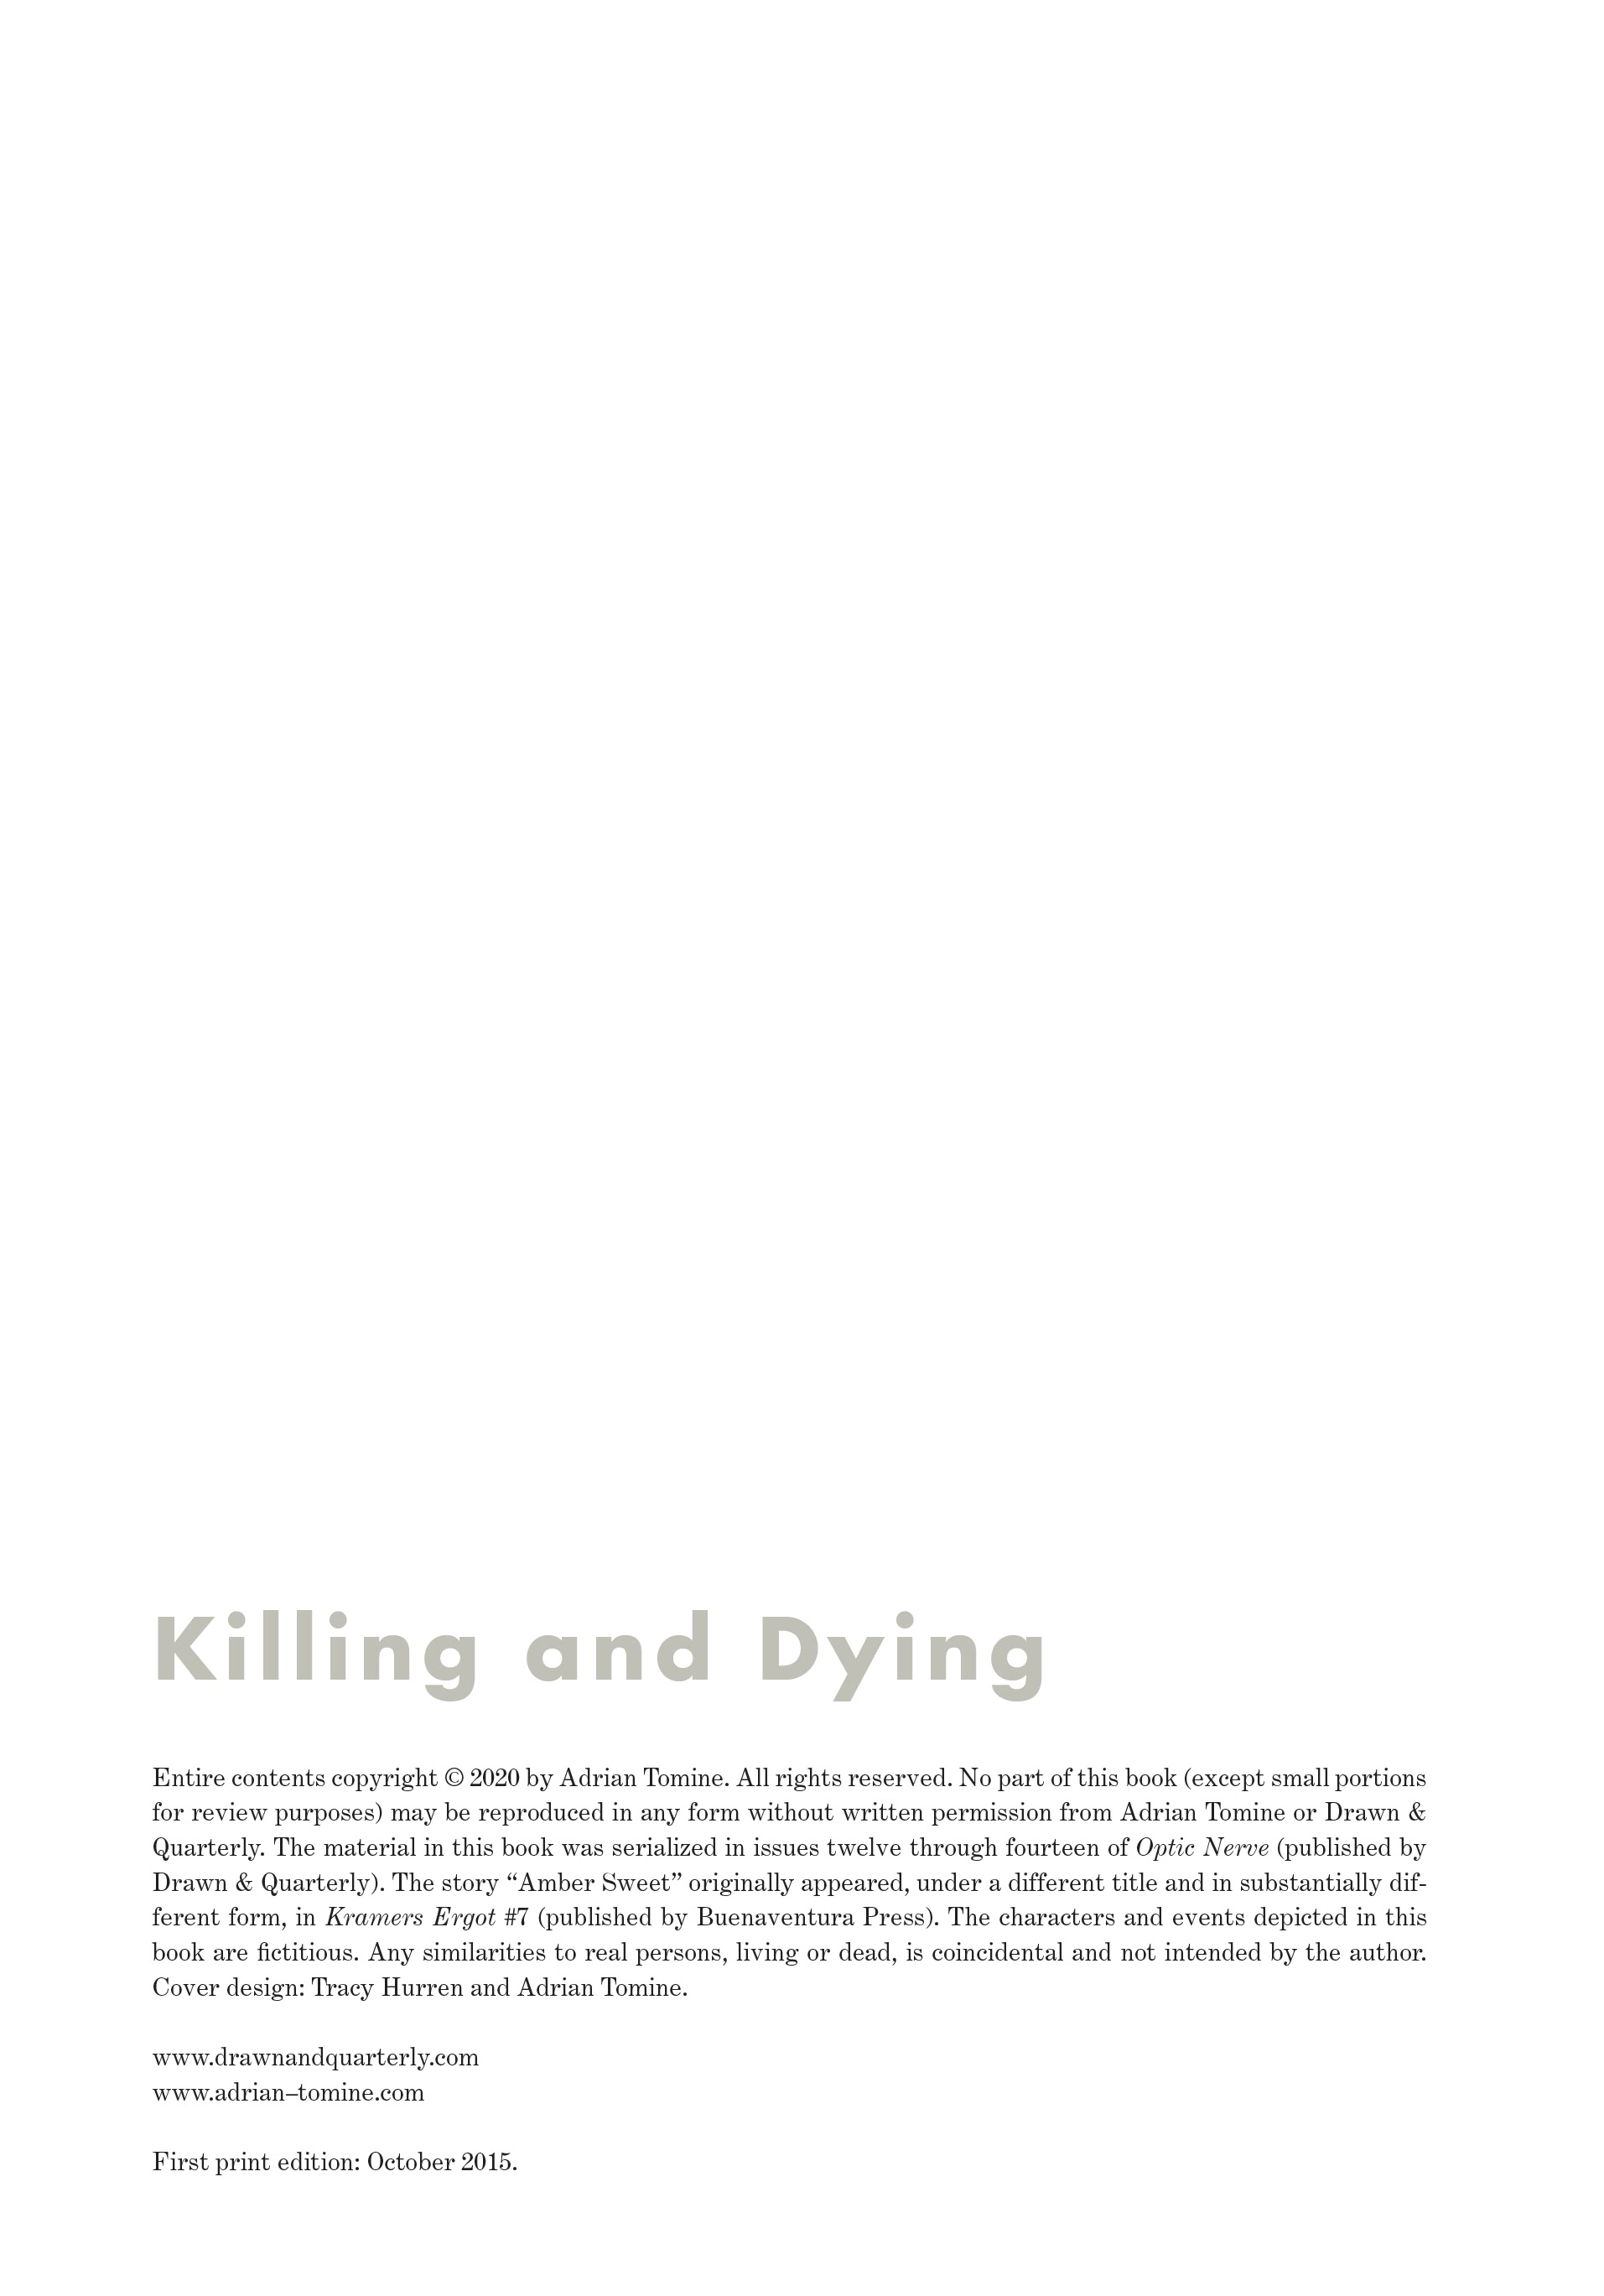 Read online Killing and Dying comic -  Issue # TPB - 119